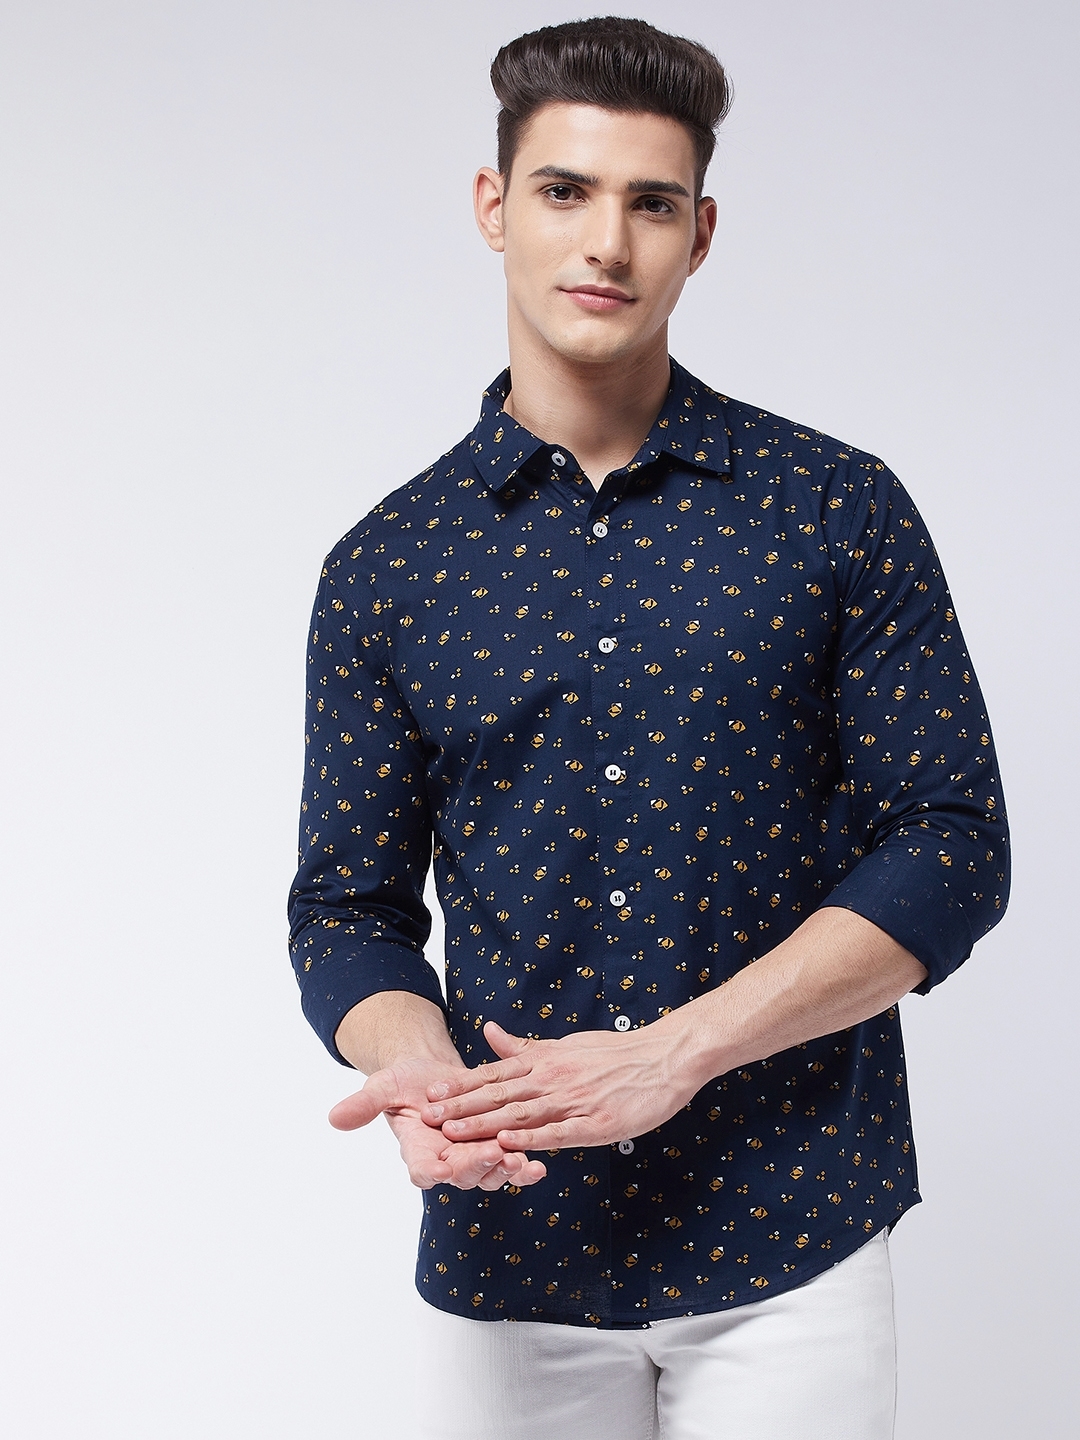 Rick Masch Men's Slim Fit Fine Cotton Printed Full Sleeves Casual Shirt